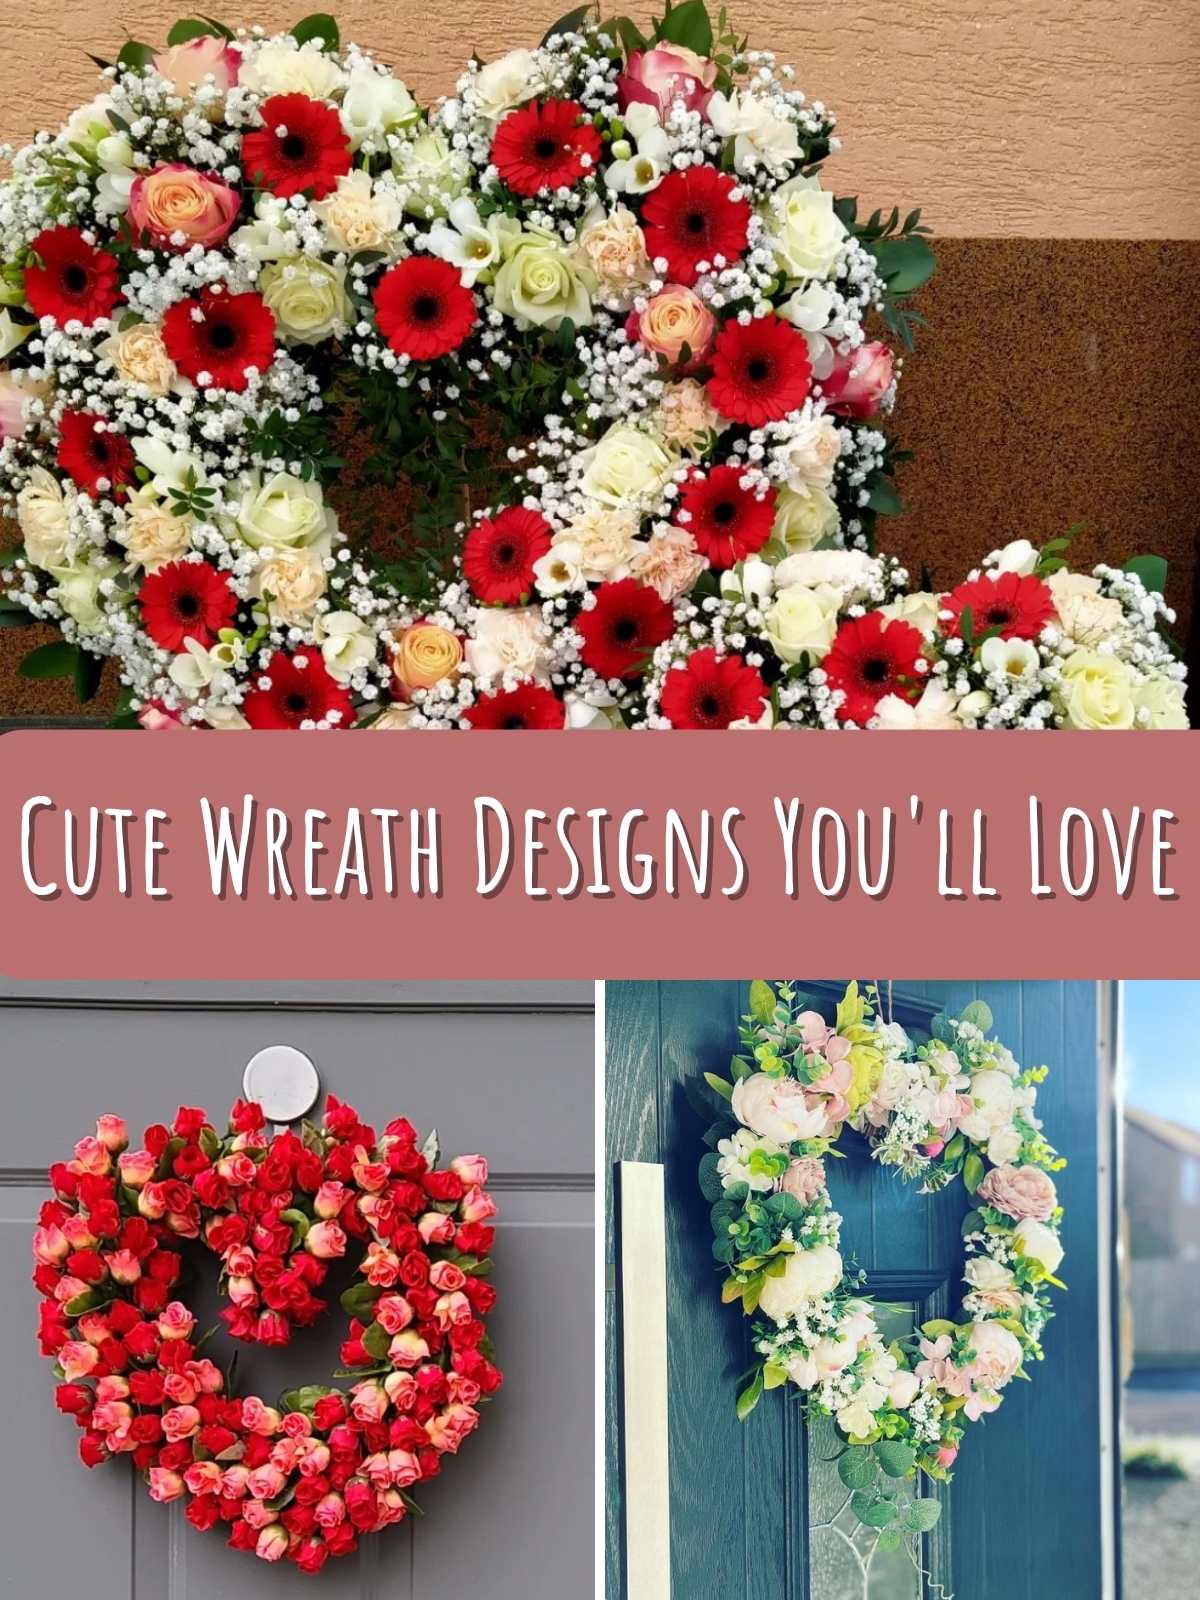 Cute wreath designs with 3 different photos.